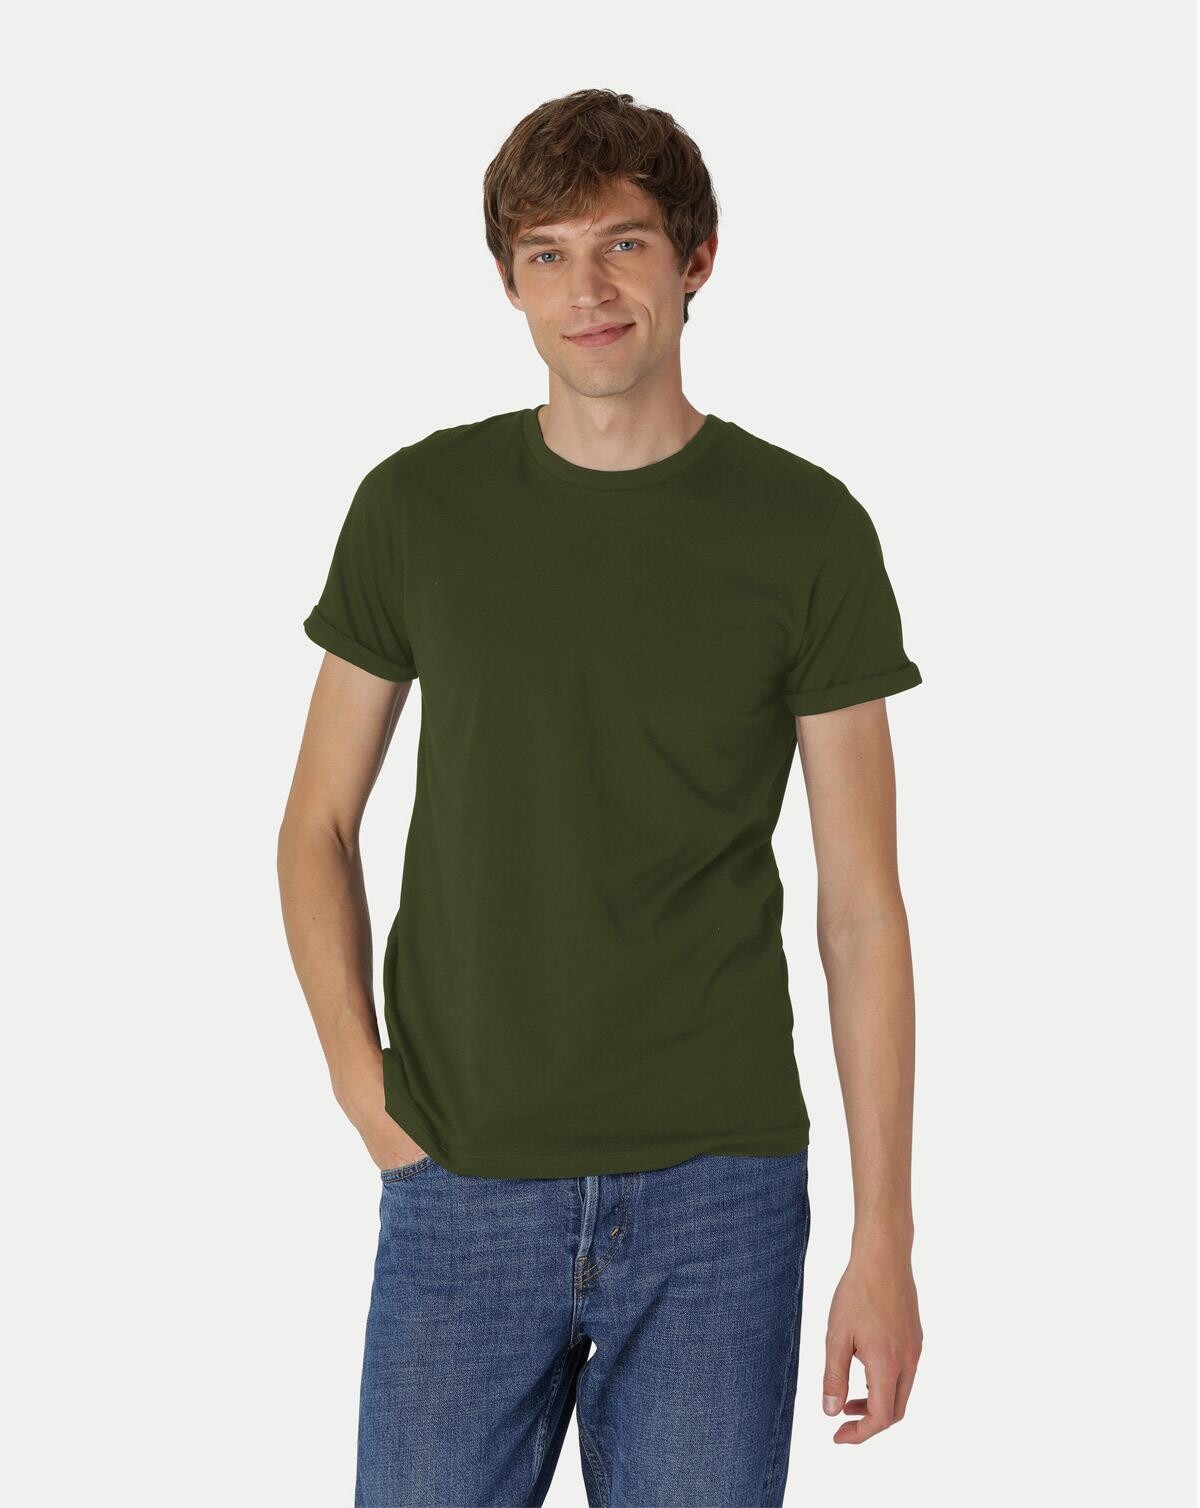 Neutral Organic - Mens Roll Up Sleeve T-shirt (Oliven, M)